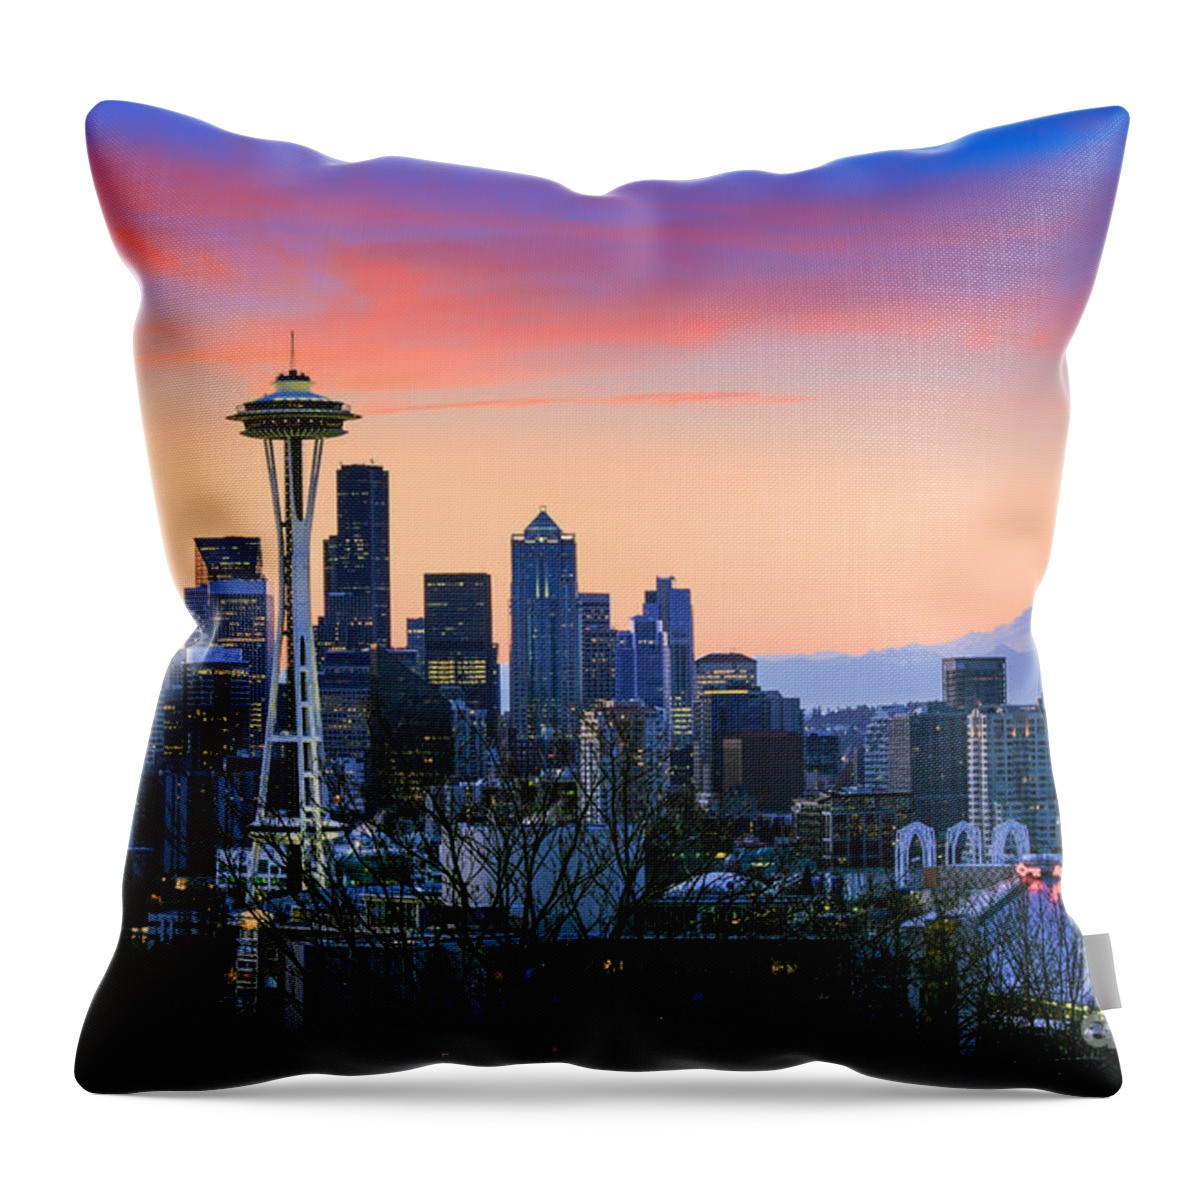 Seattle Throw Pillow featuring the photograph Seattle Waking Up by Inge Johnsson